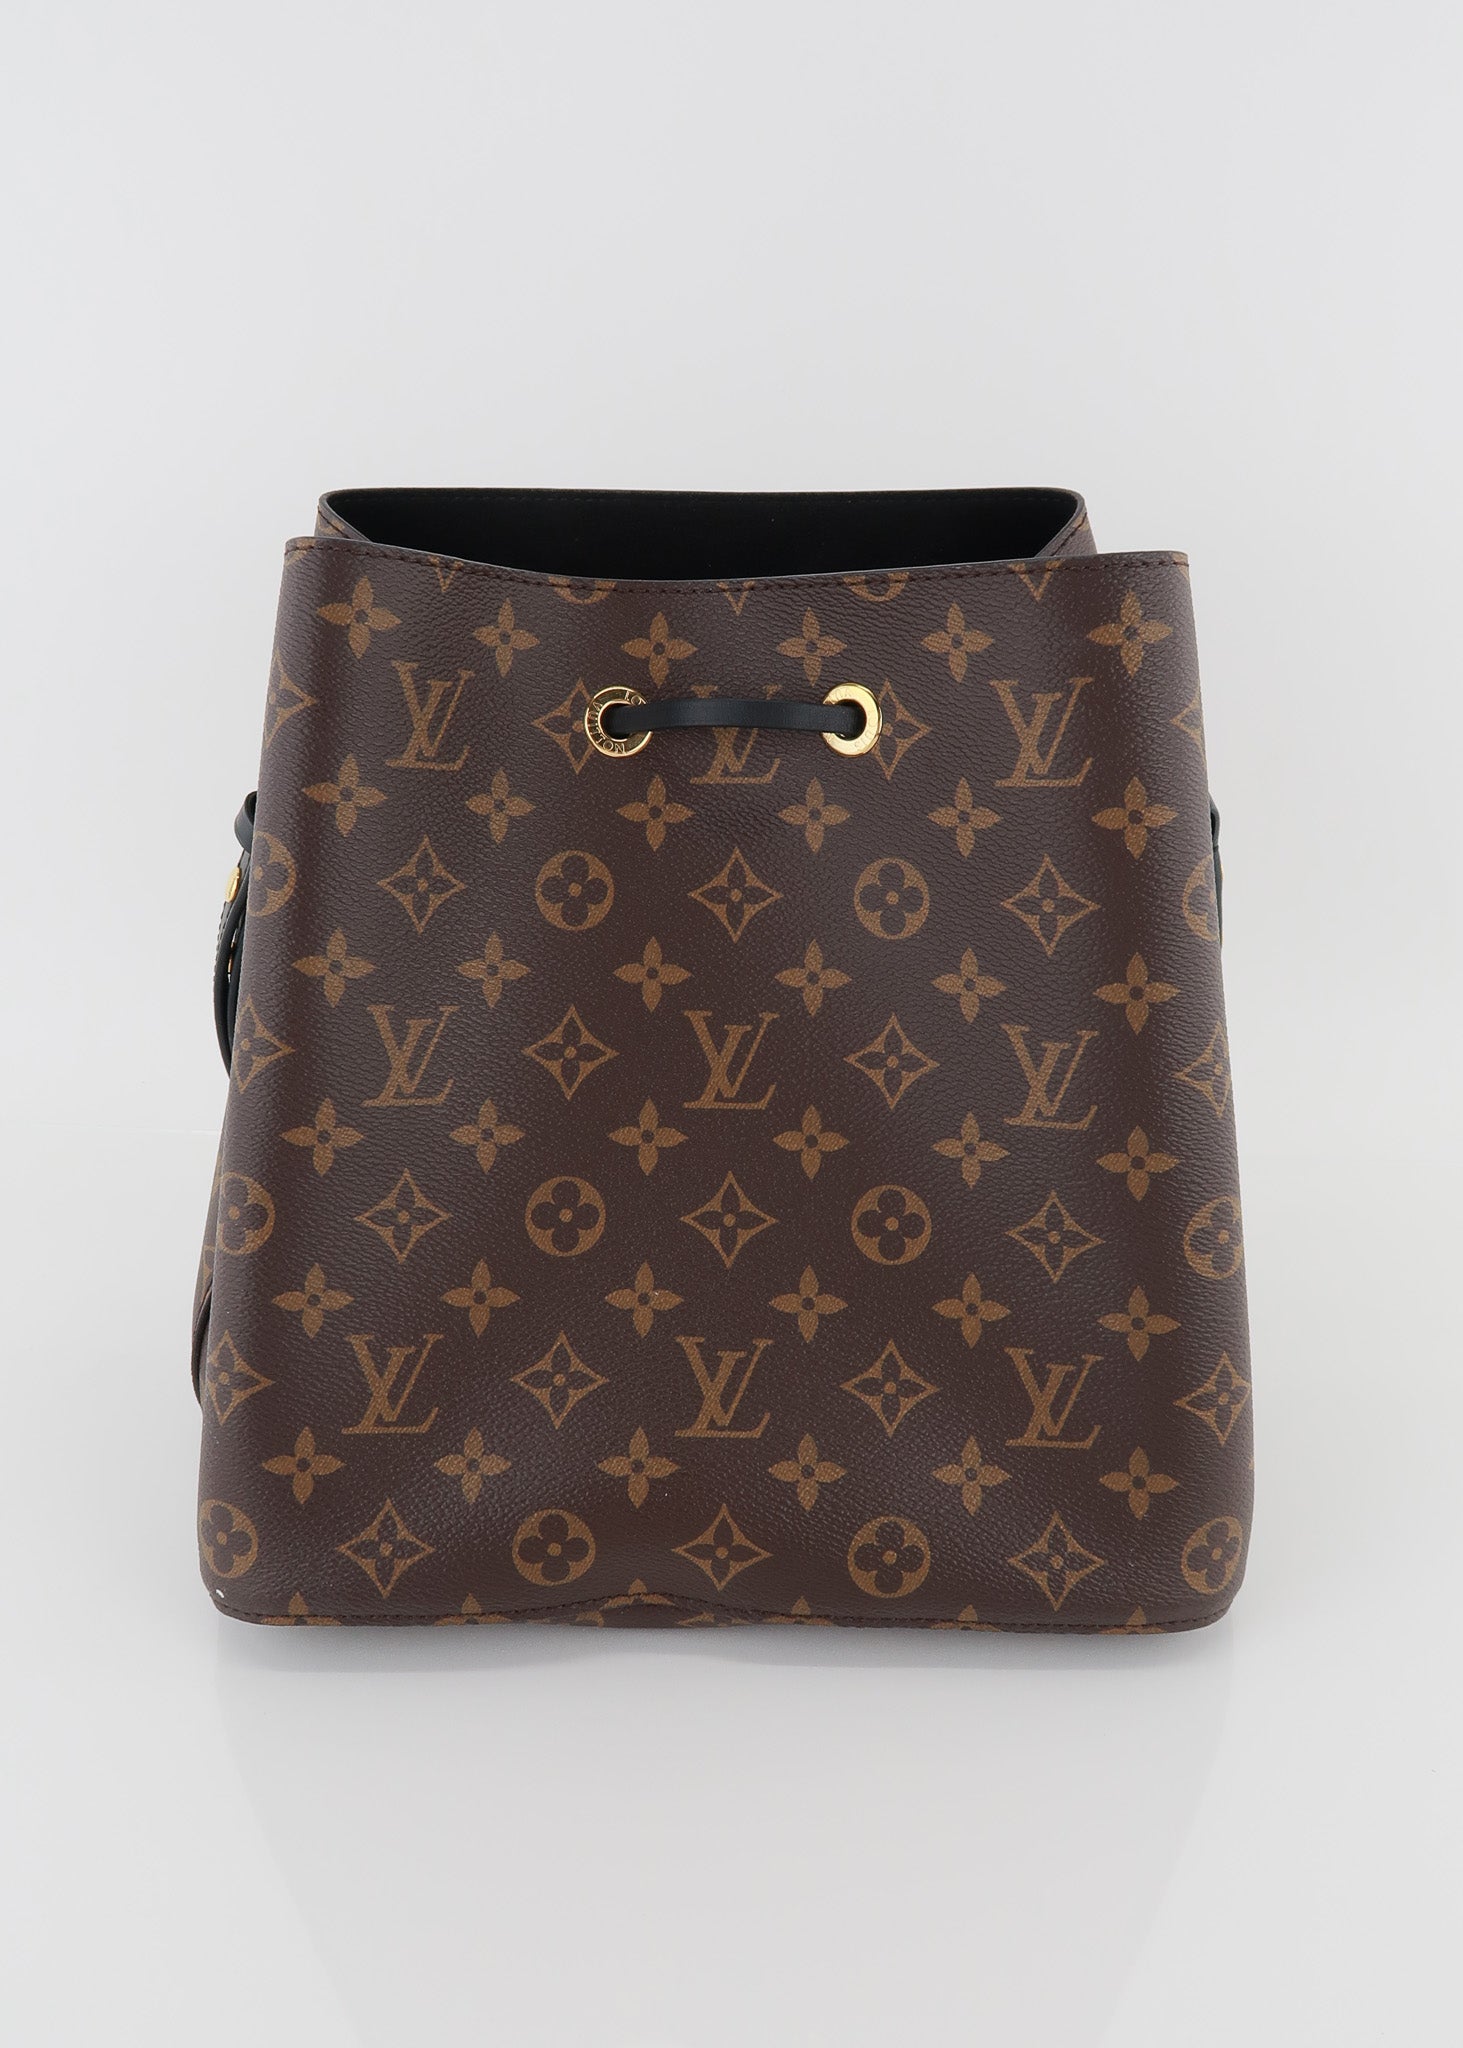 Authentic LV neonoe bucket bag available. Its coded Swipe for details.  Price 2200